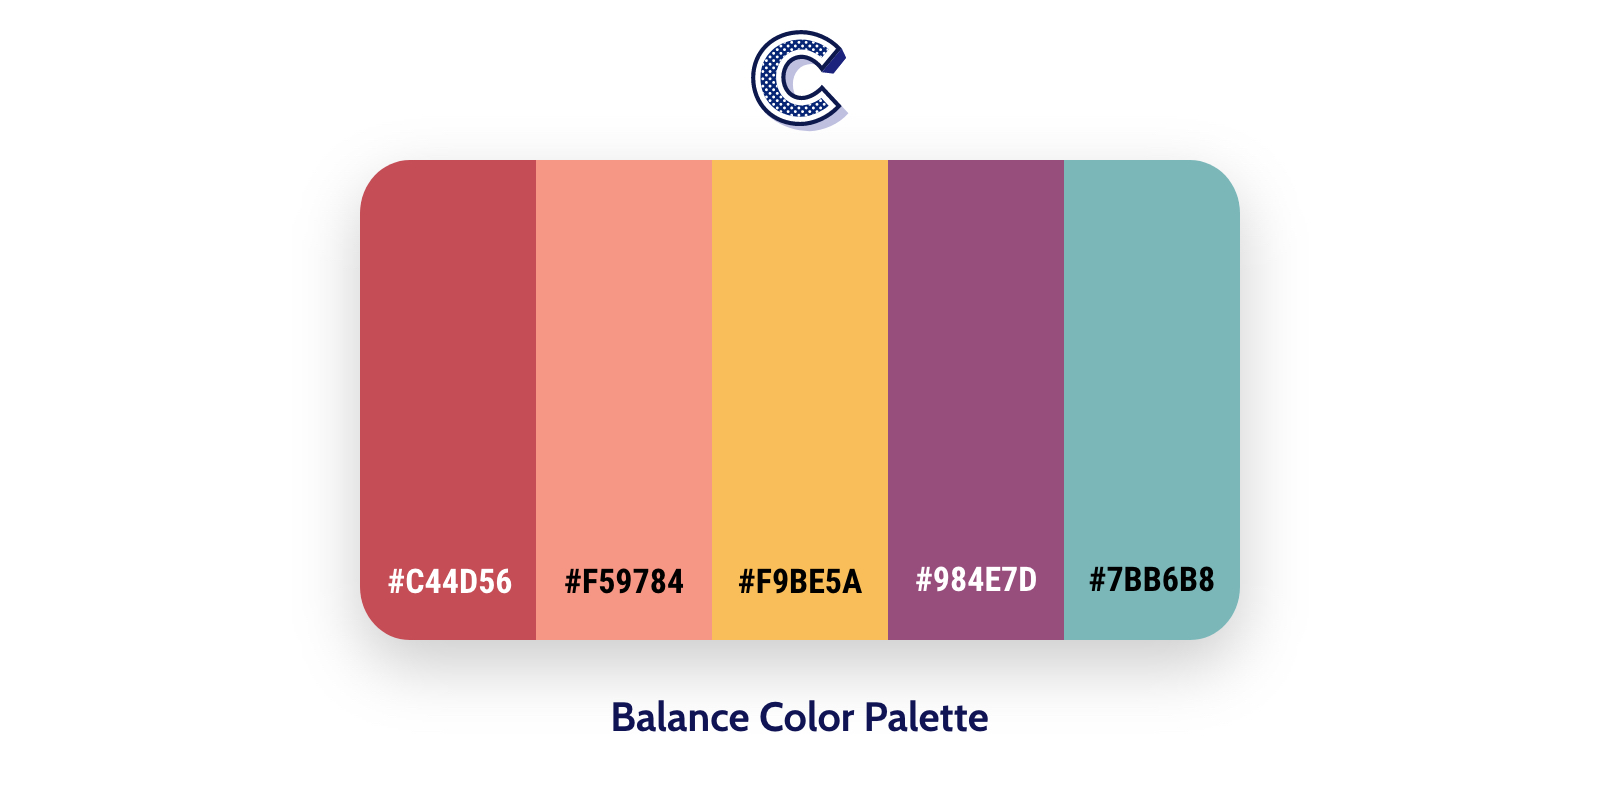 the featured image of balance color palette